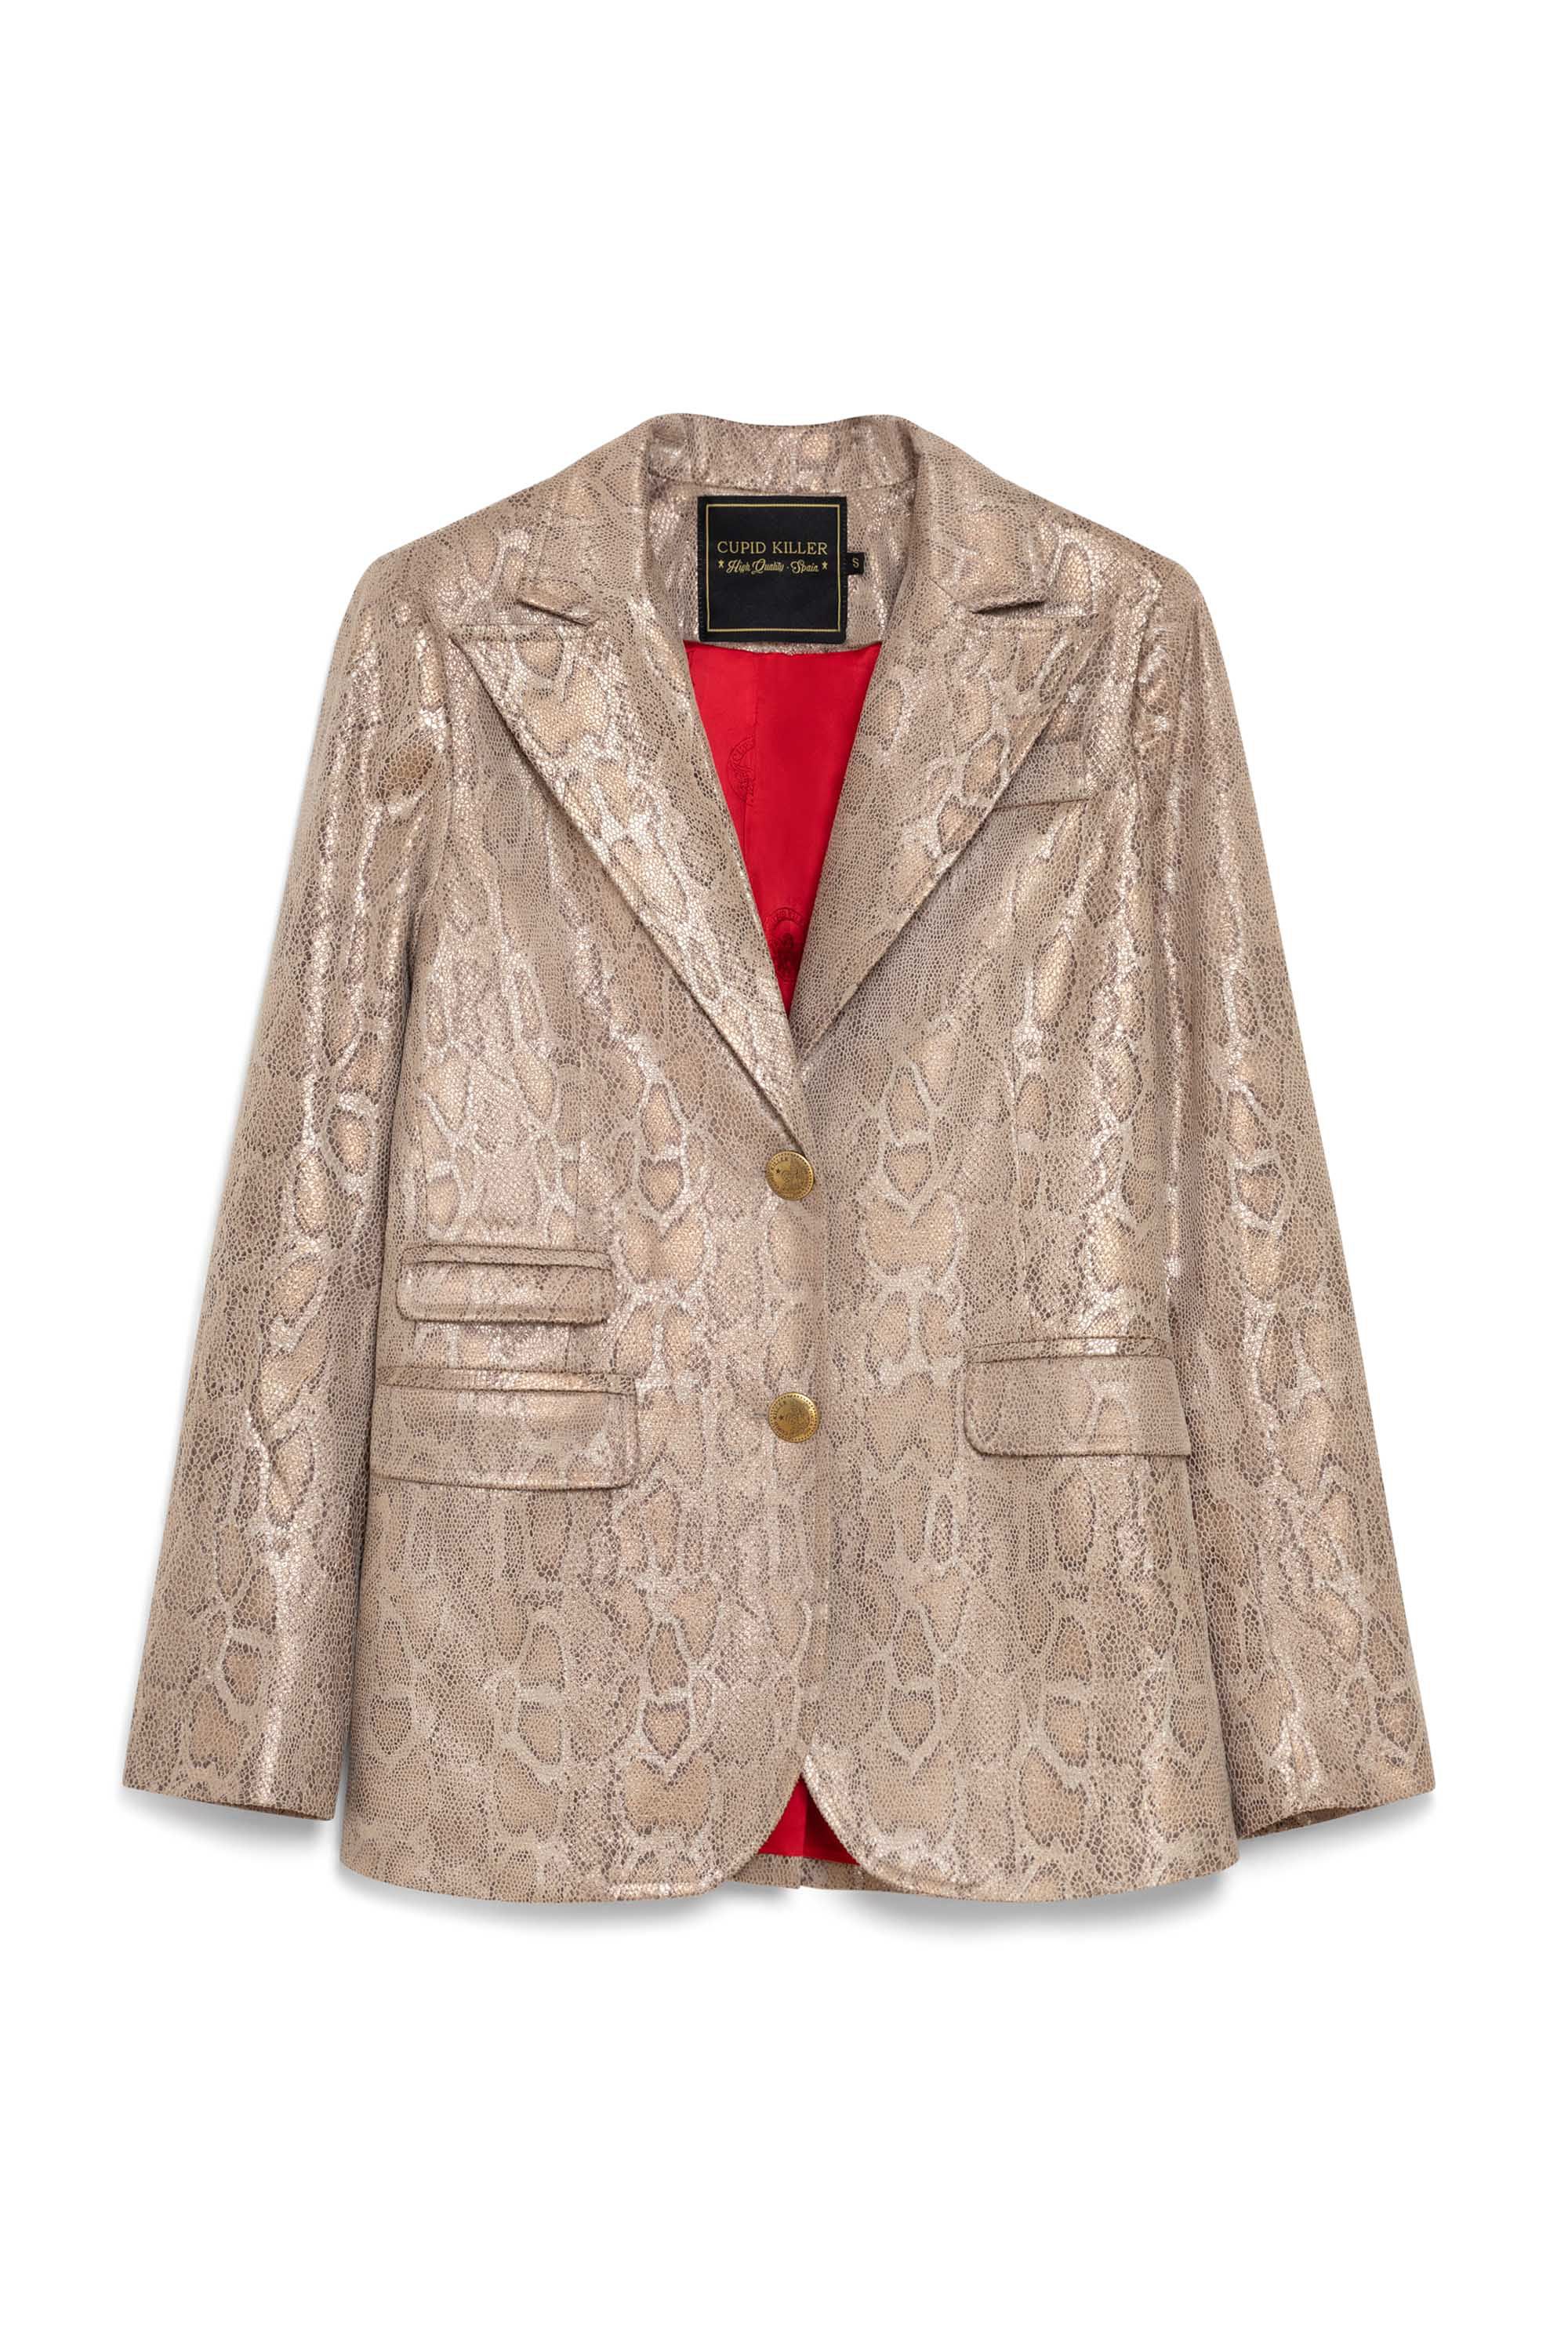 Snake  print straight cut blazer with maxi lapel and four pockets. With
customized buttons and linning.